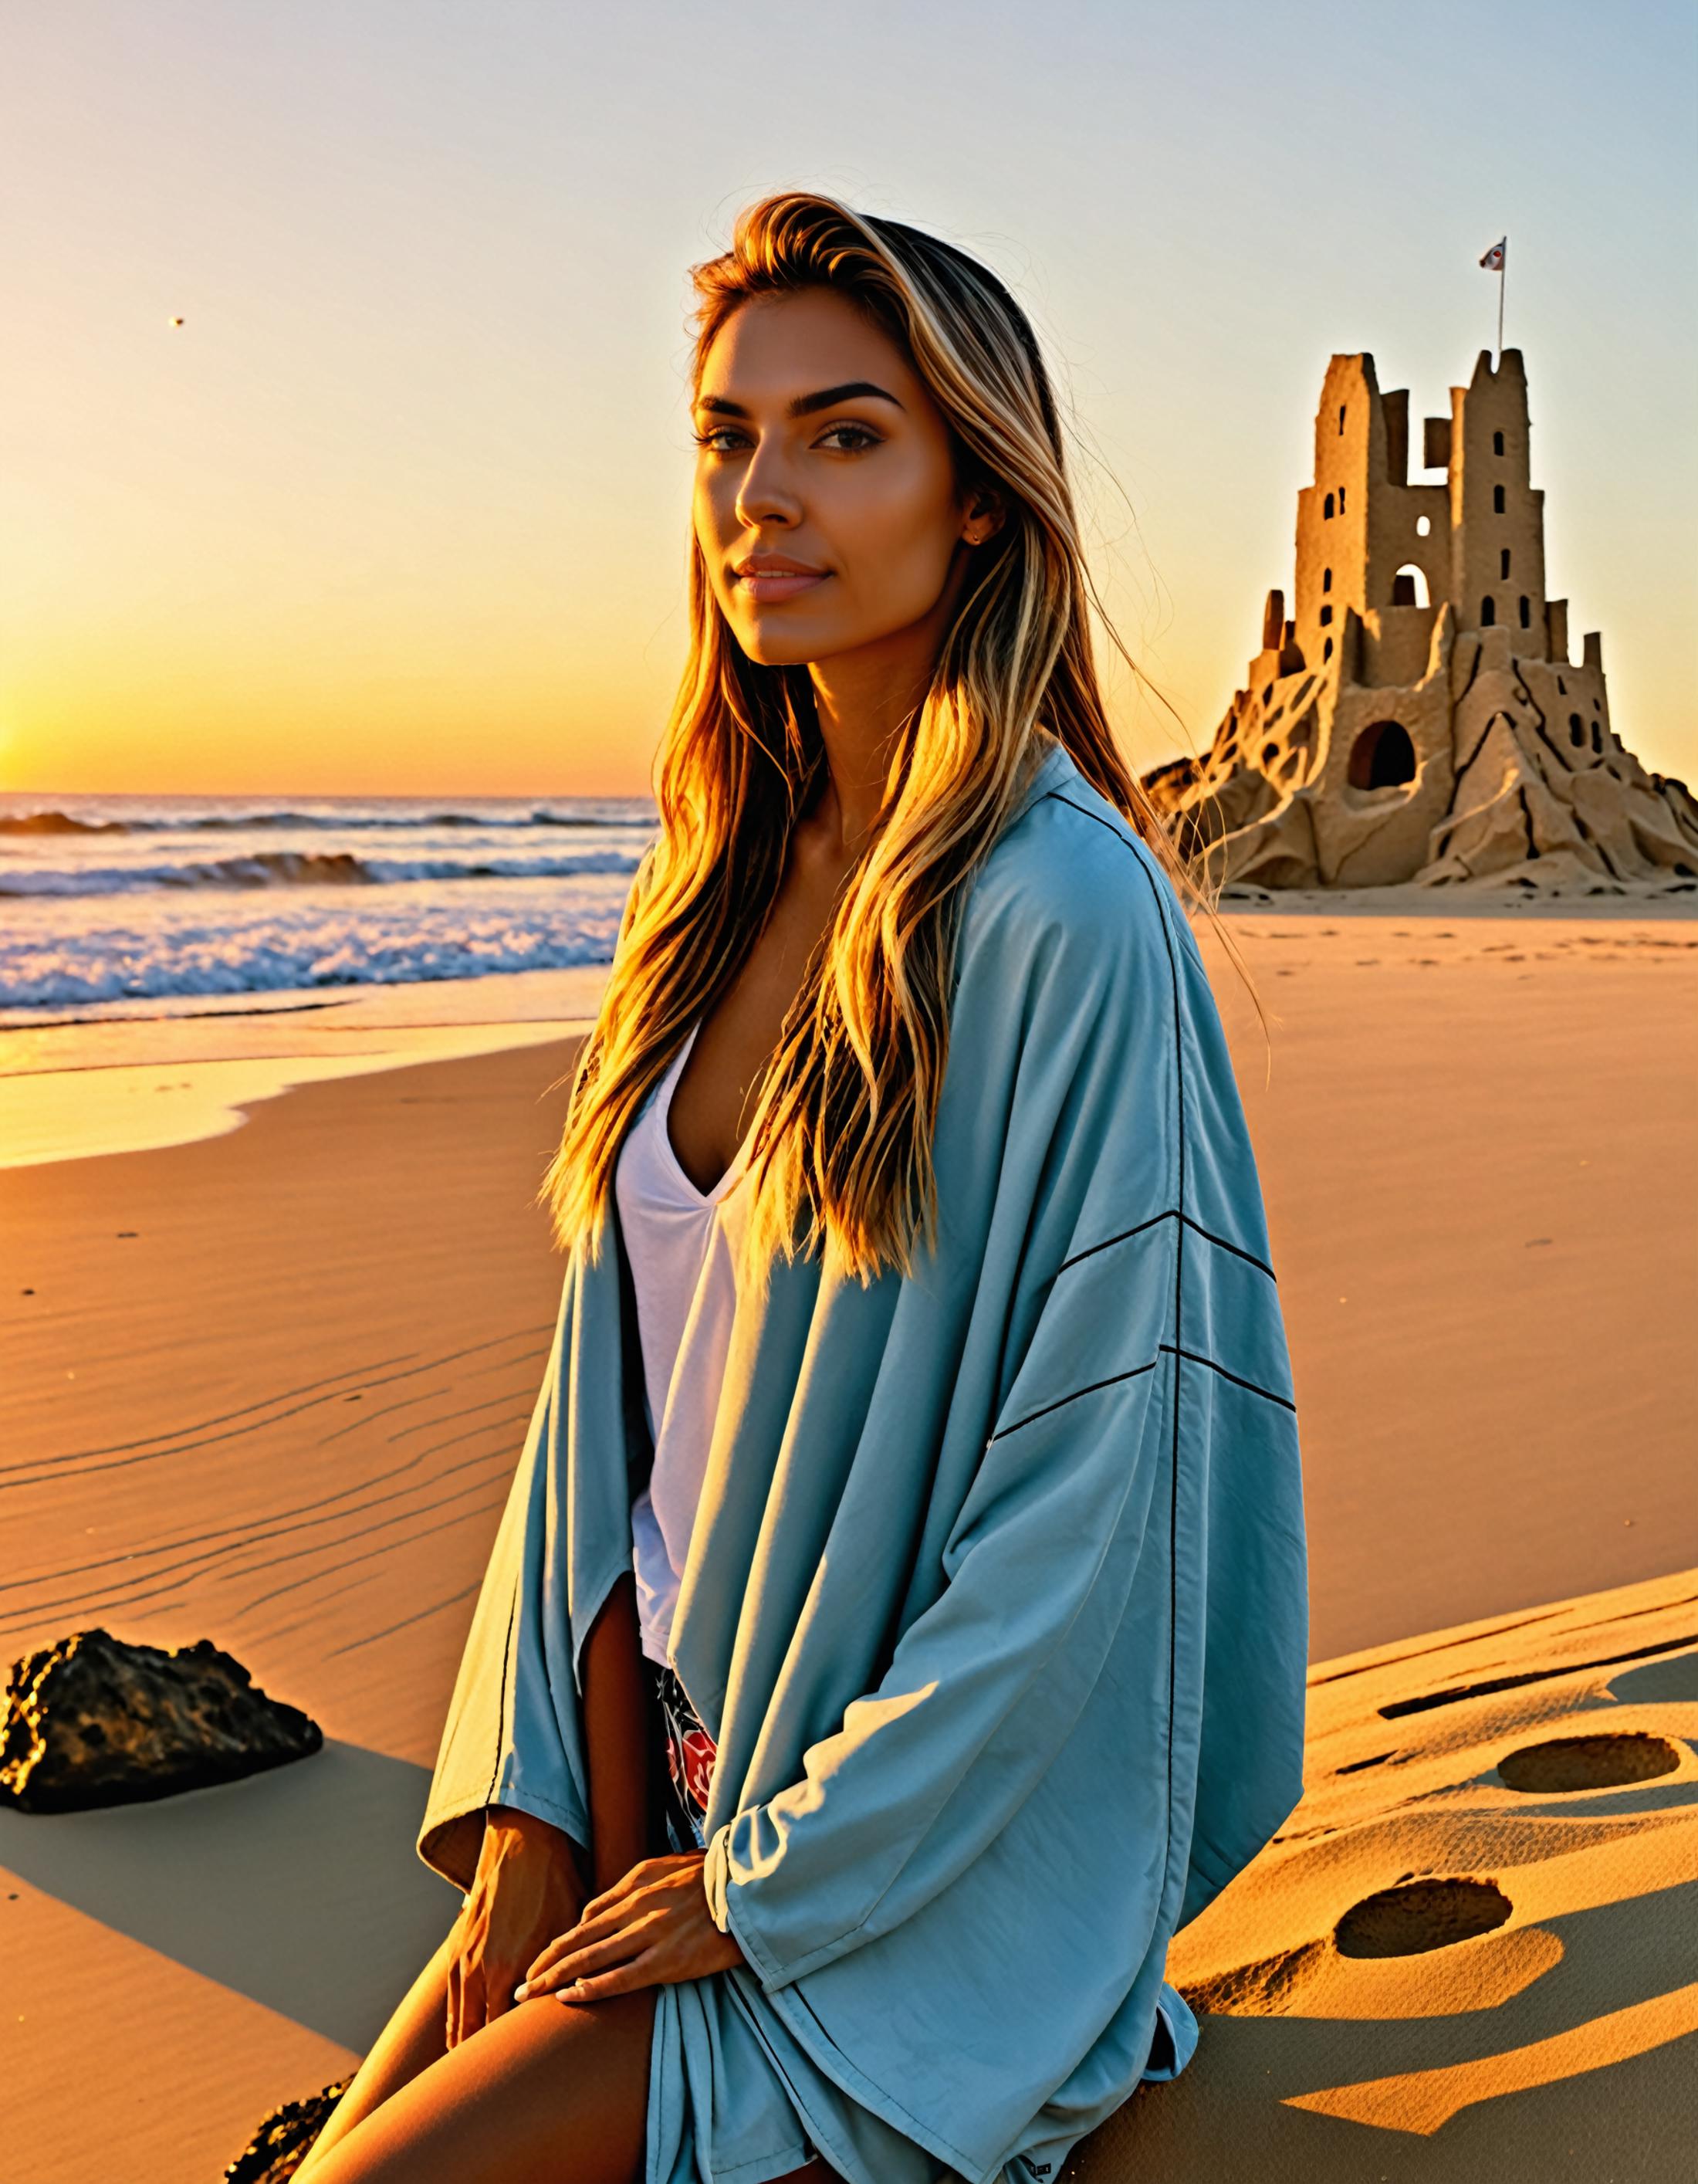 A beautiful young woman posing on the beach with a sandcastle in the background.